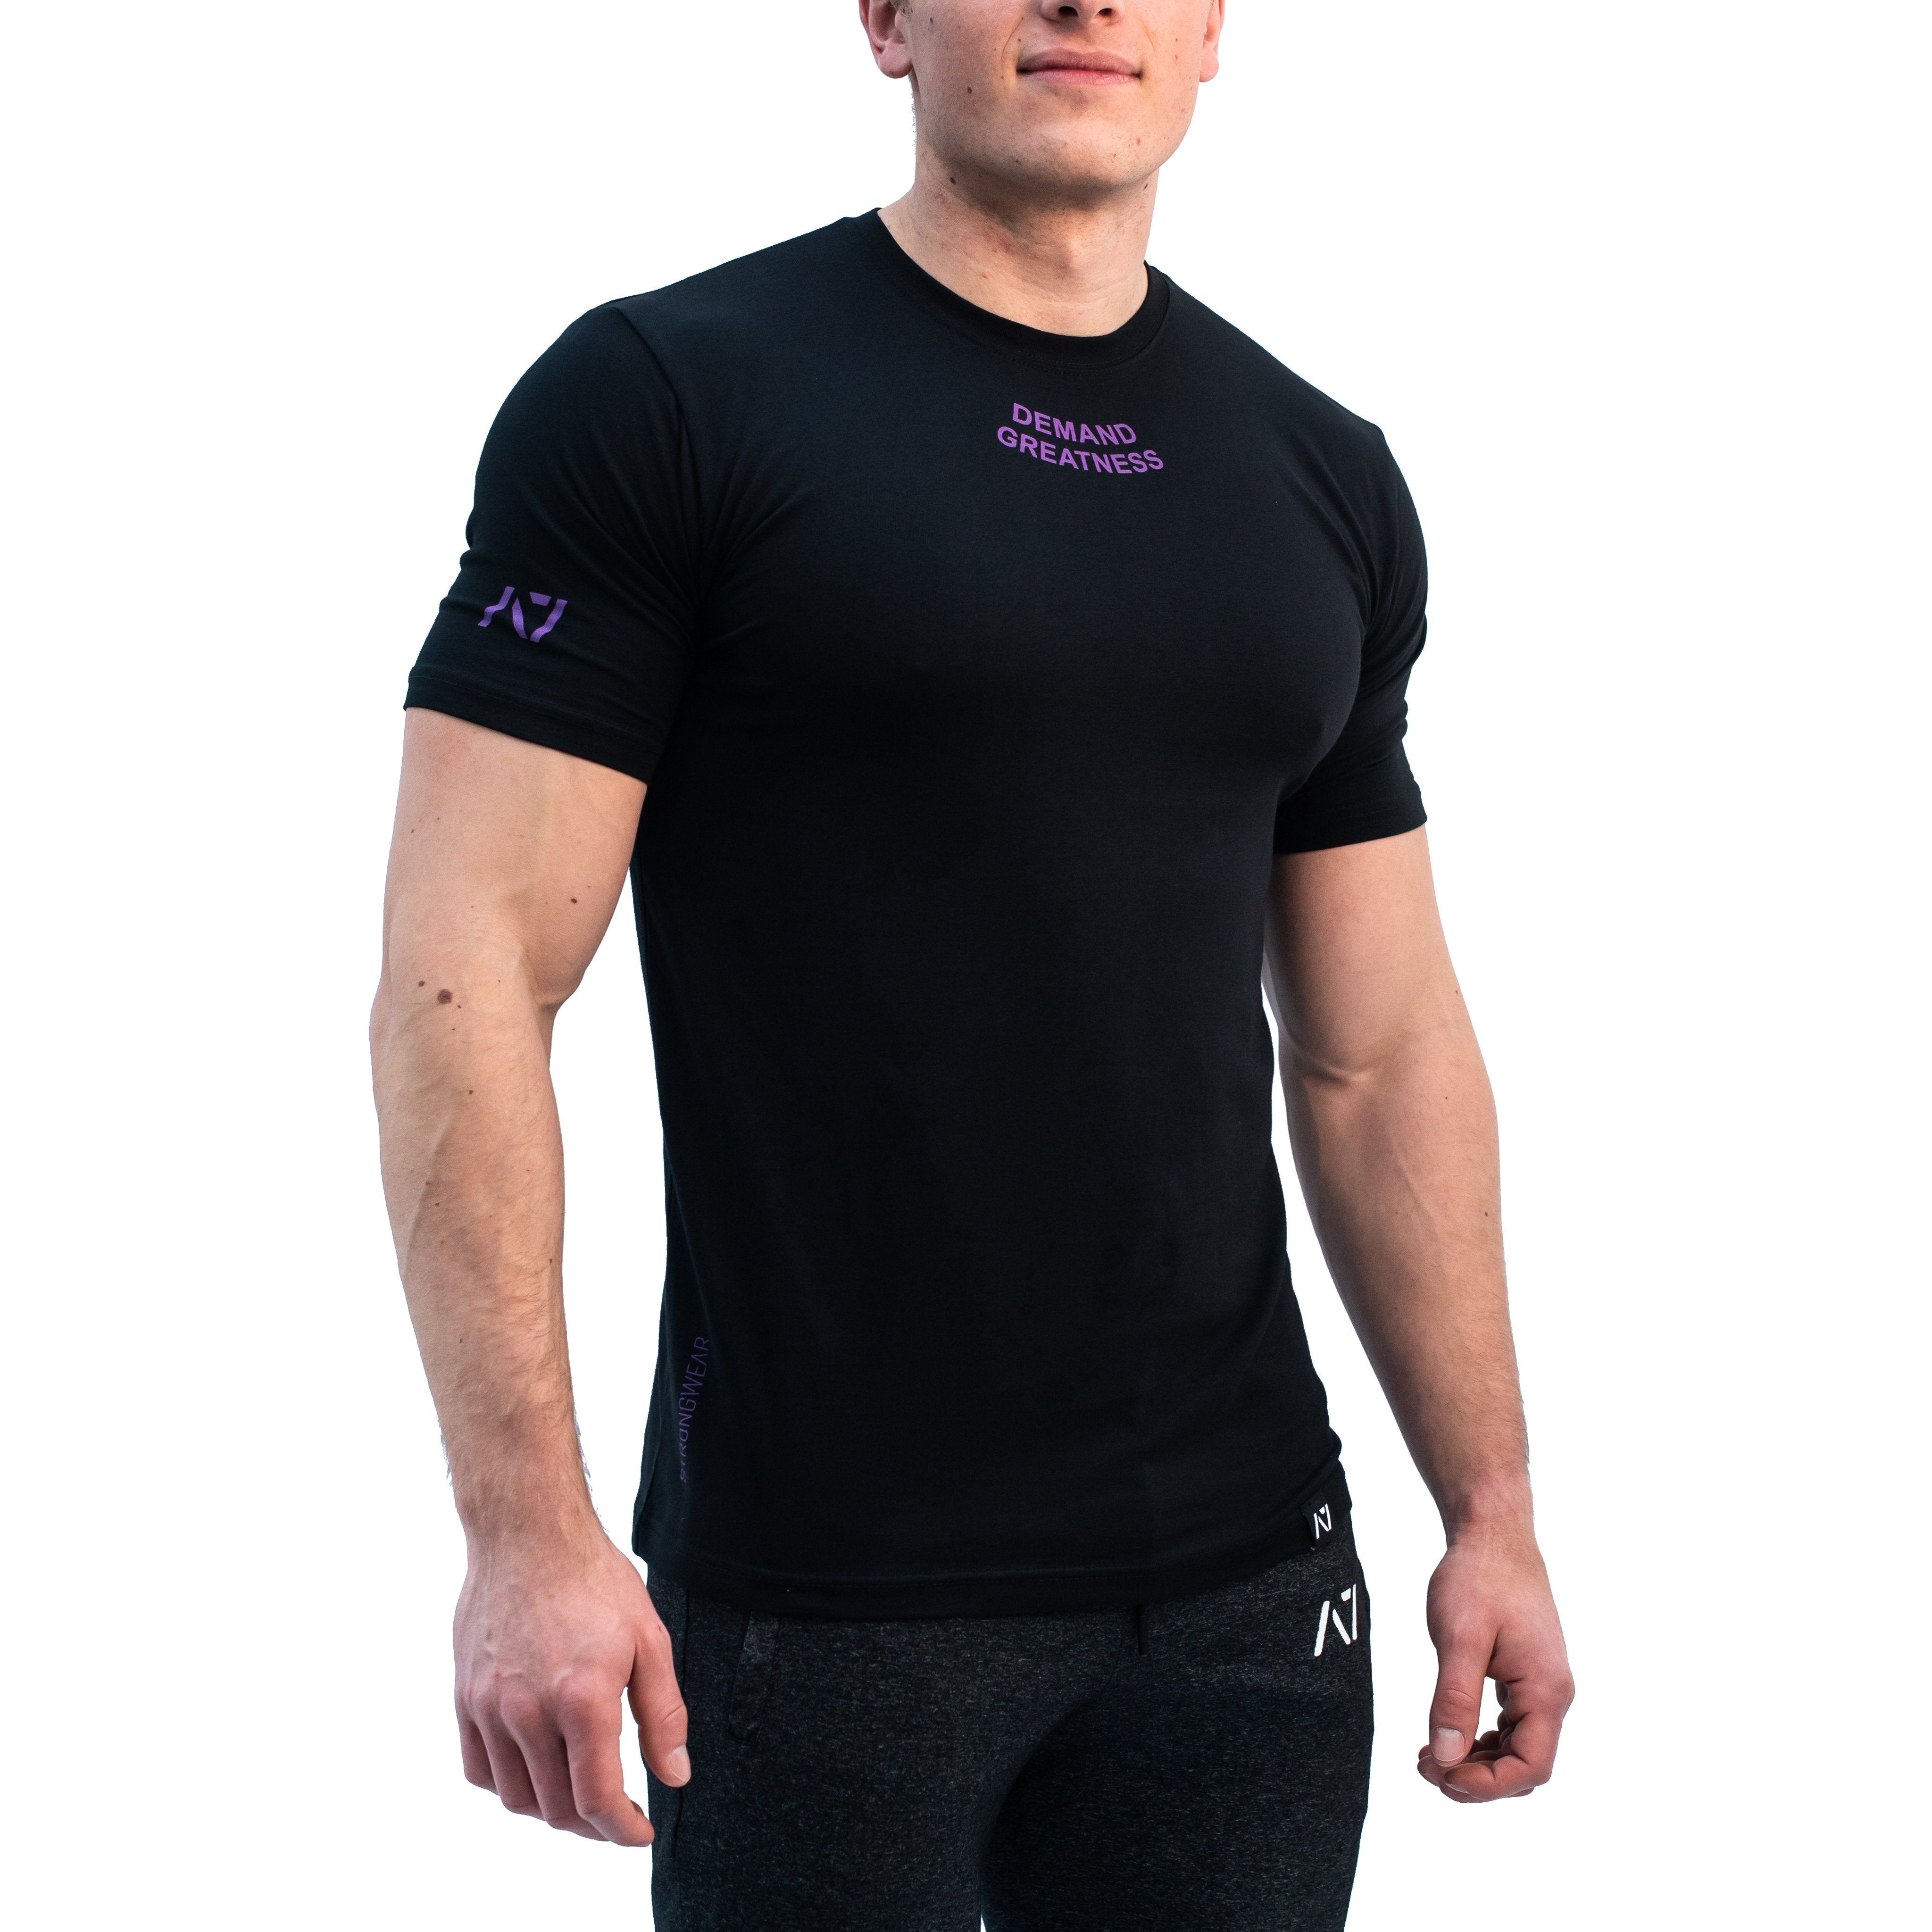 Standout from the crowd in our Purple Demand Greatness Crop and let your energy show on the platform, in your training or while out and about. Our Meet tees offer a level of comfort like no other through their unique blend of materials and stretch in the places you desire for a comfortable fit that keeps your mind on your performance